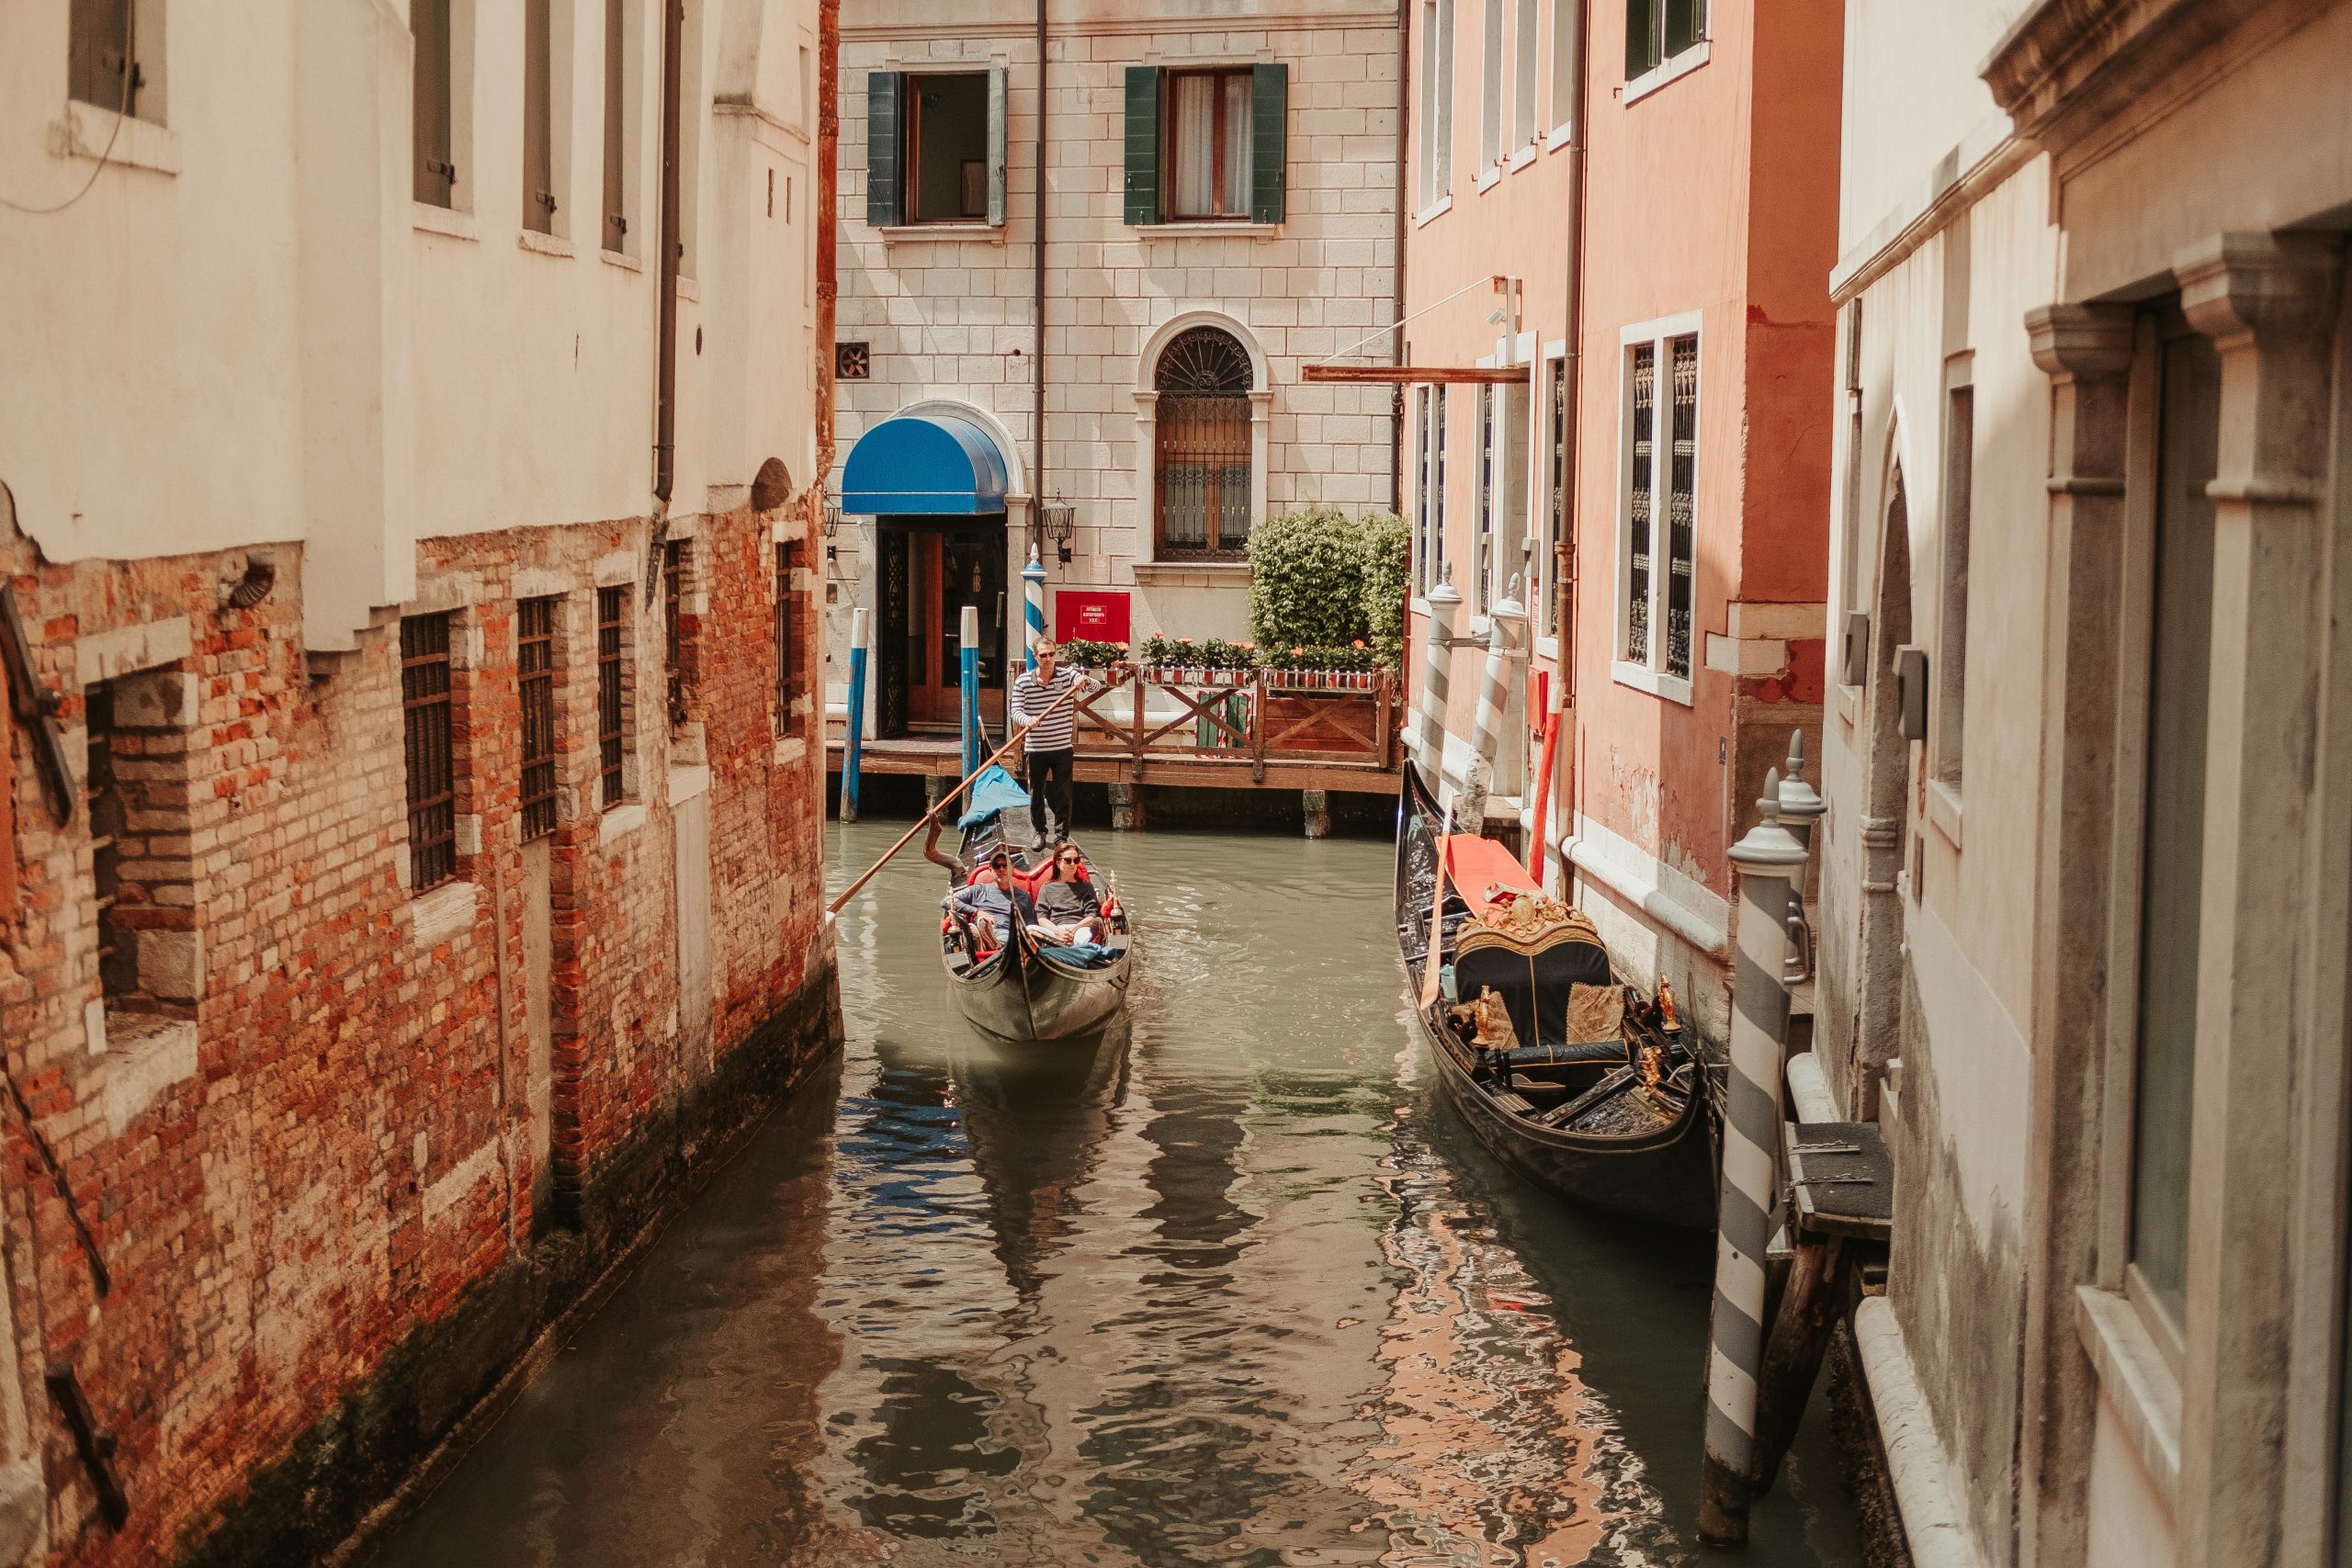 Venice is so beautiful with its canals and gondolas